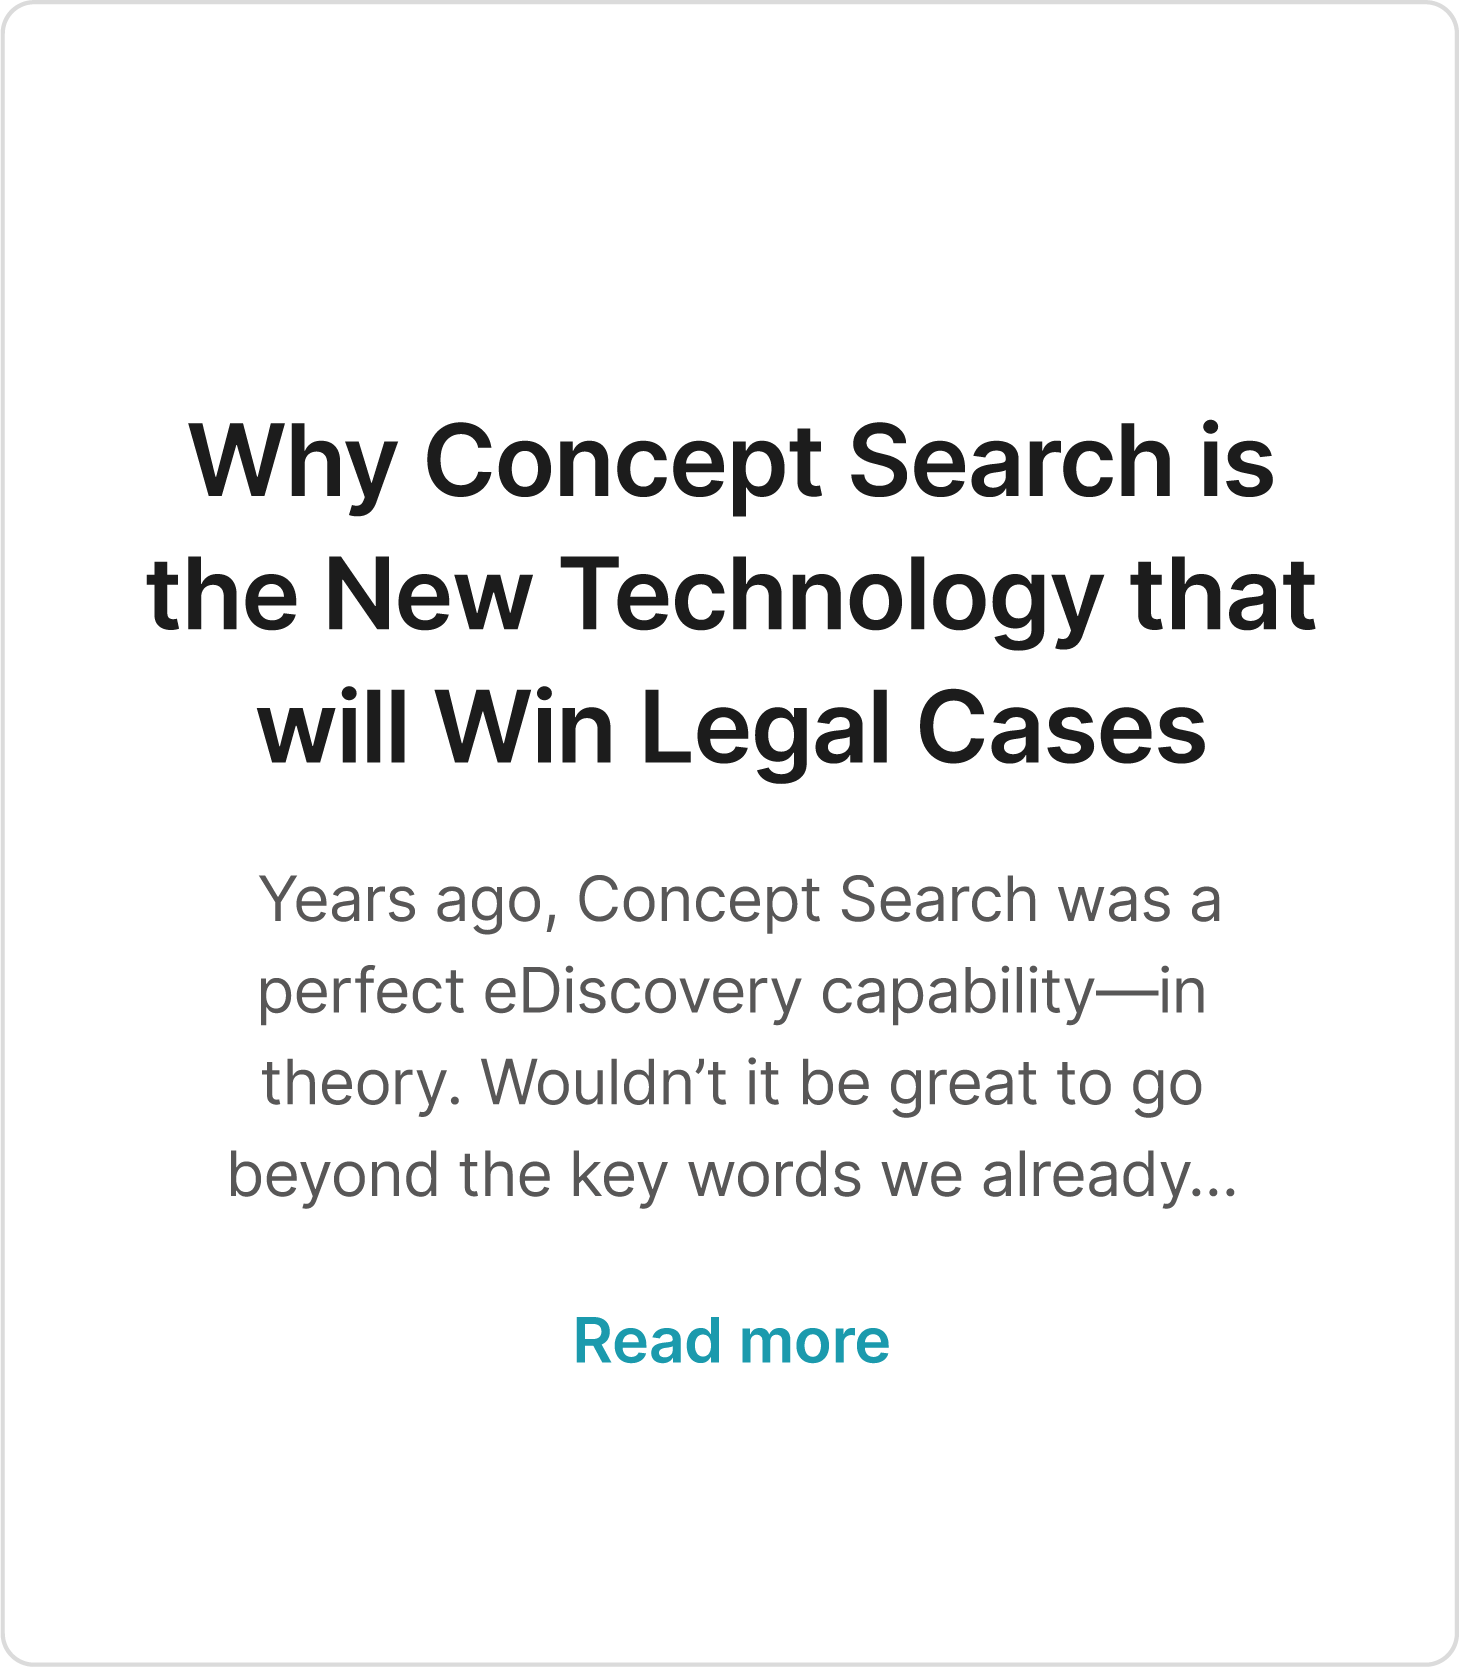 WhyConceptSearch